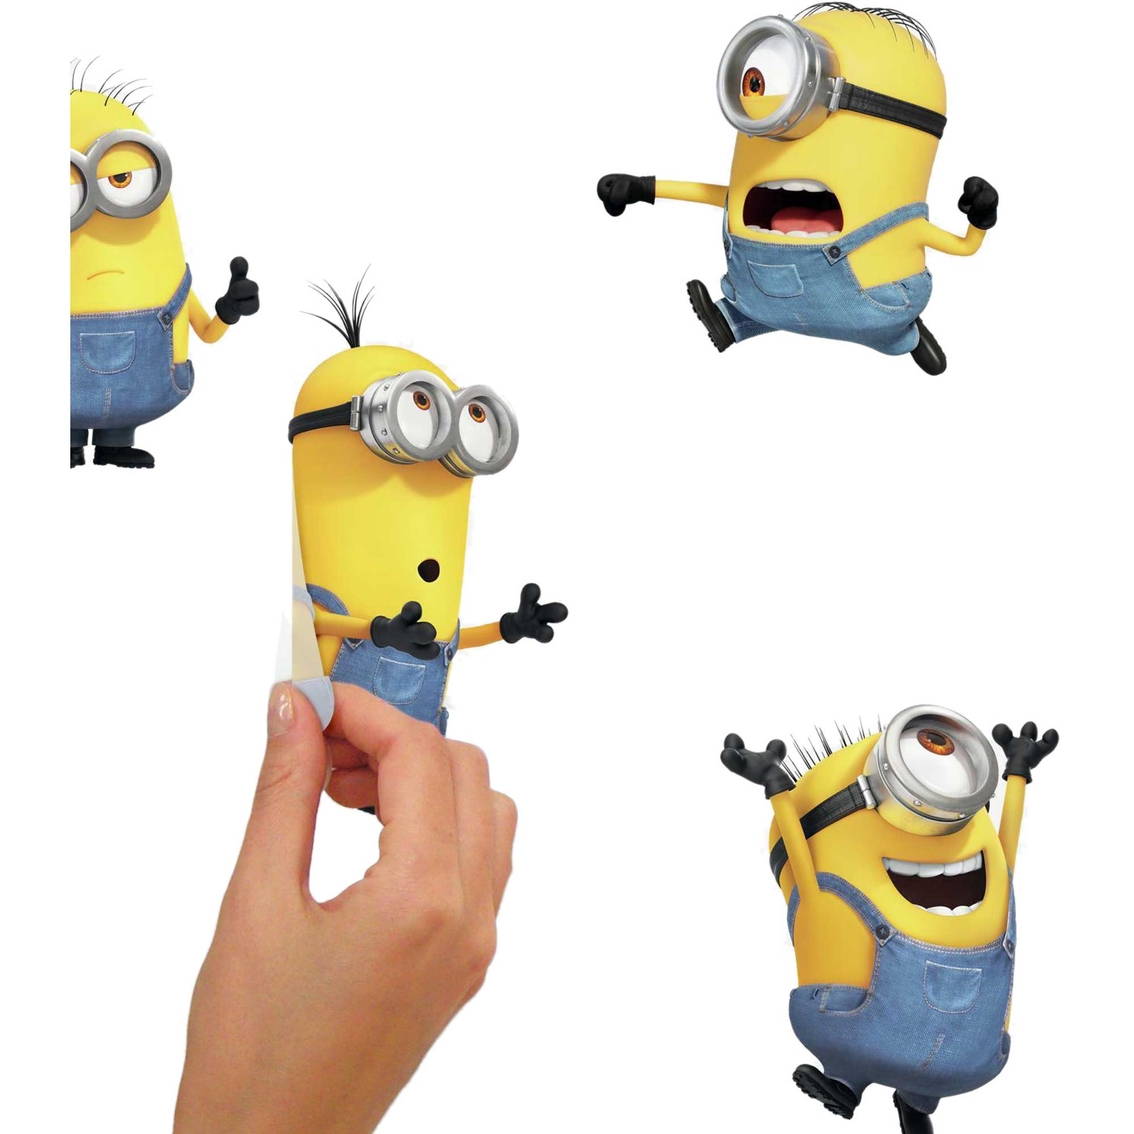 RoomMates Minions 2 Peel & Stick Wall Decals - Image 3 of 6